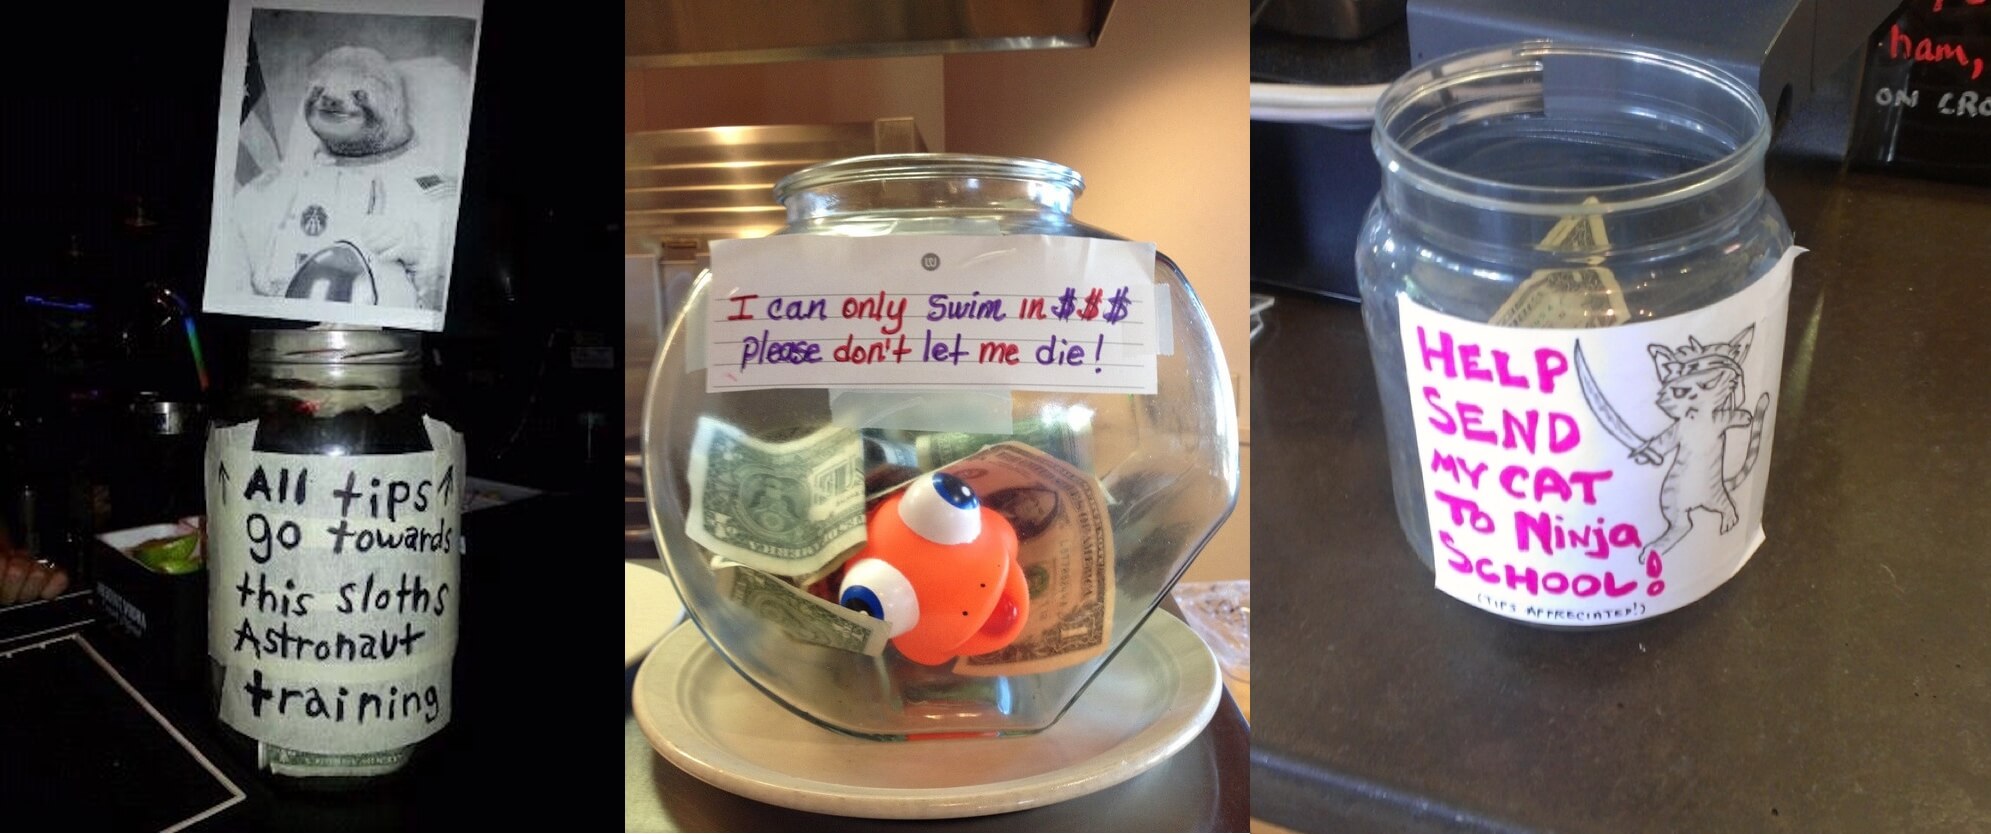 A variety of tip jars in an article about increasing tips.